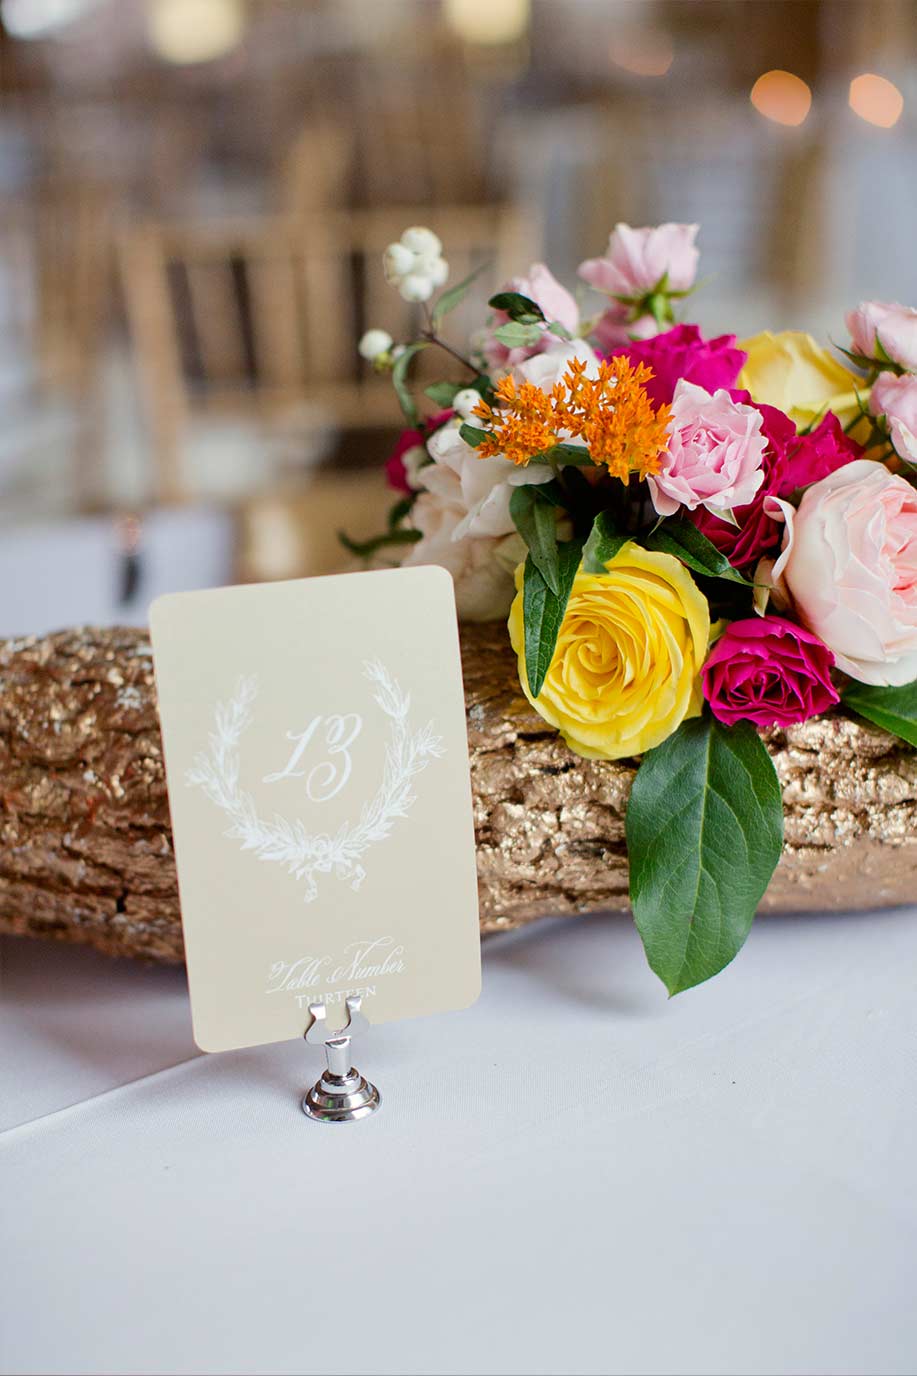 Gold log wedding centerpiece and laurel wreath table number